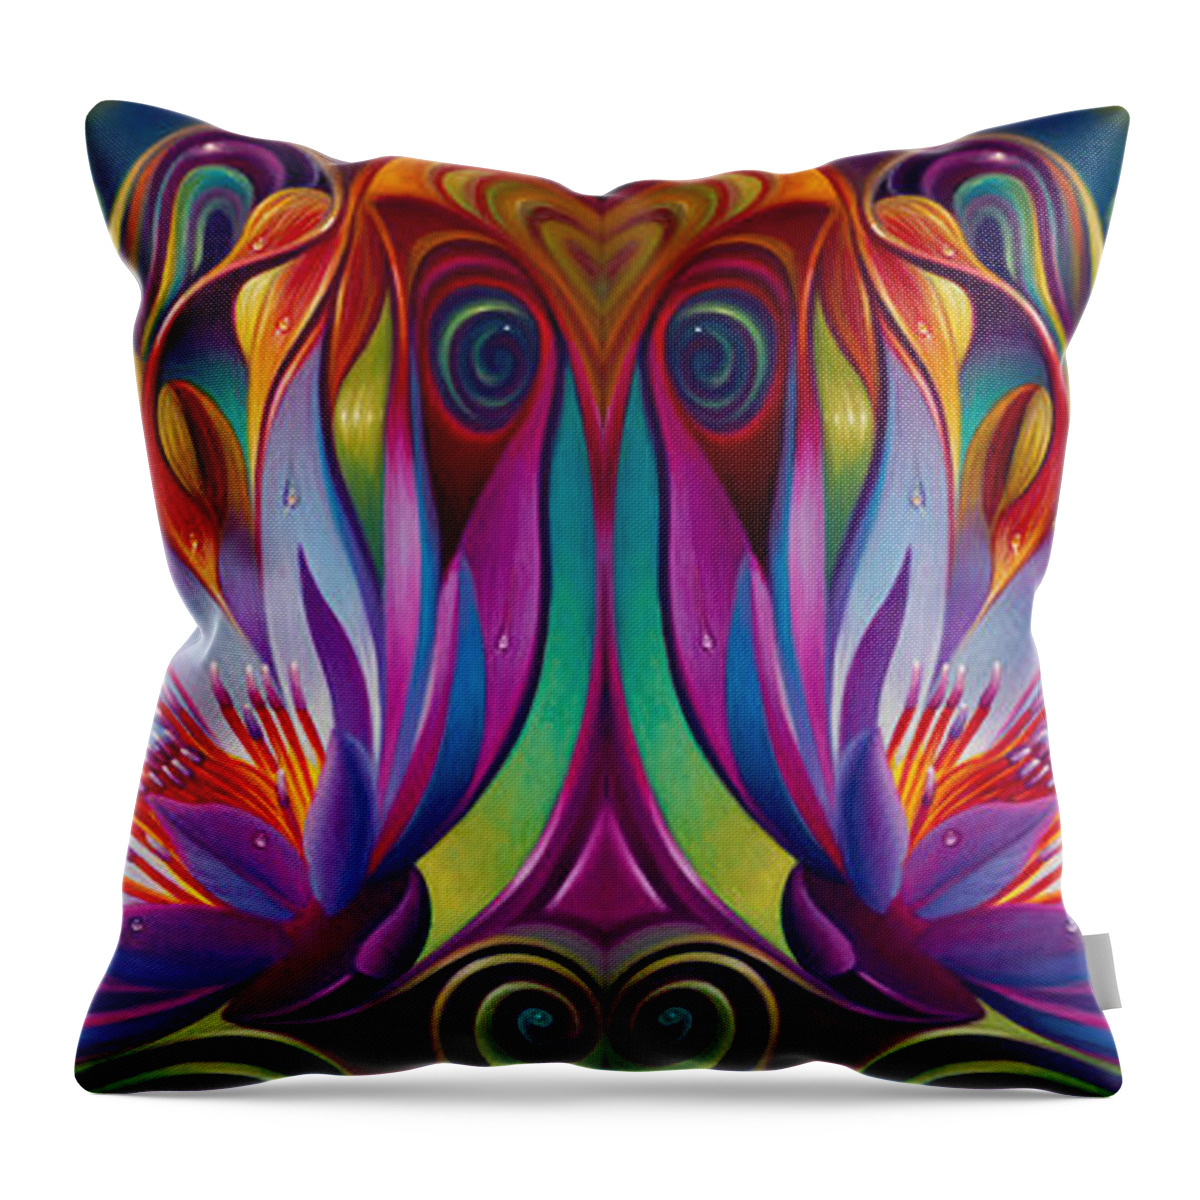 Lotus Throw Pillow featuring the painting Double Floral Fantasy by Ricardo Chavez-Mendez